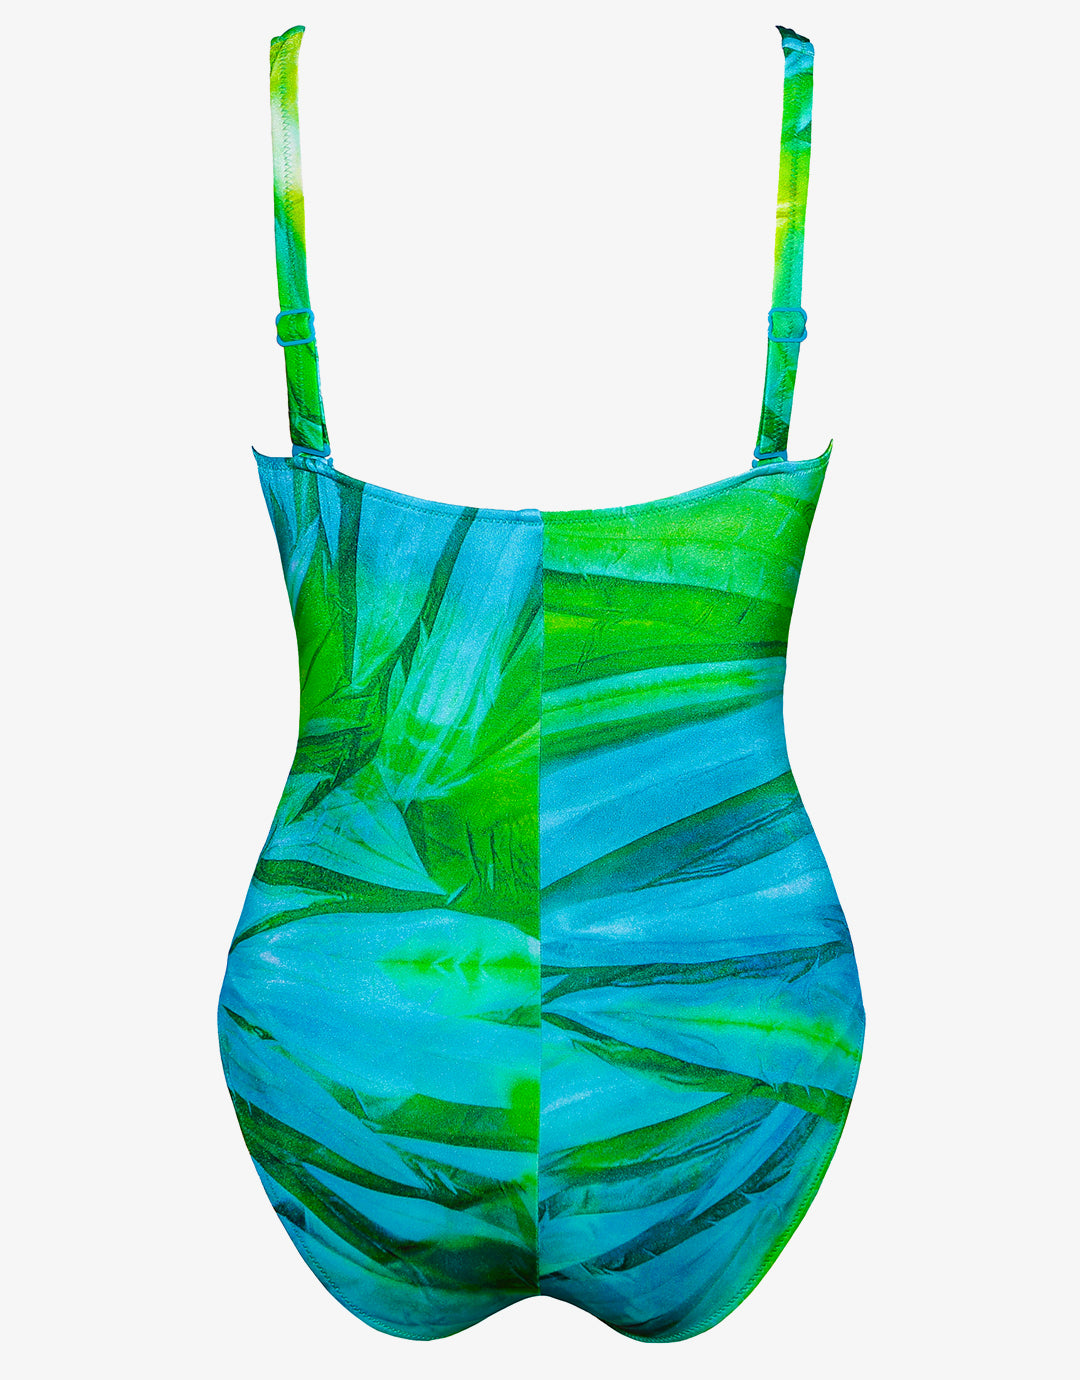 Green Waters Inclusive Fit Swimsuit - Aqua Flow - Simply Beach UK